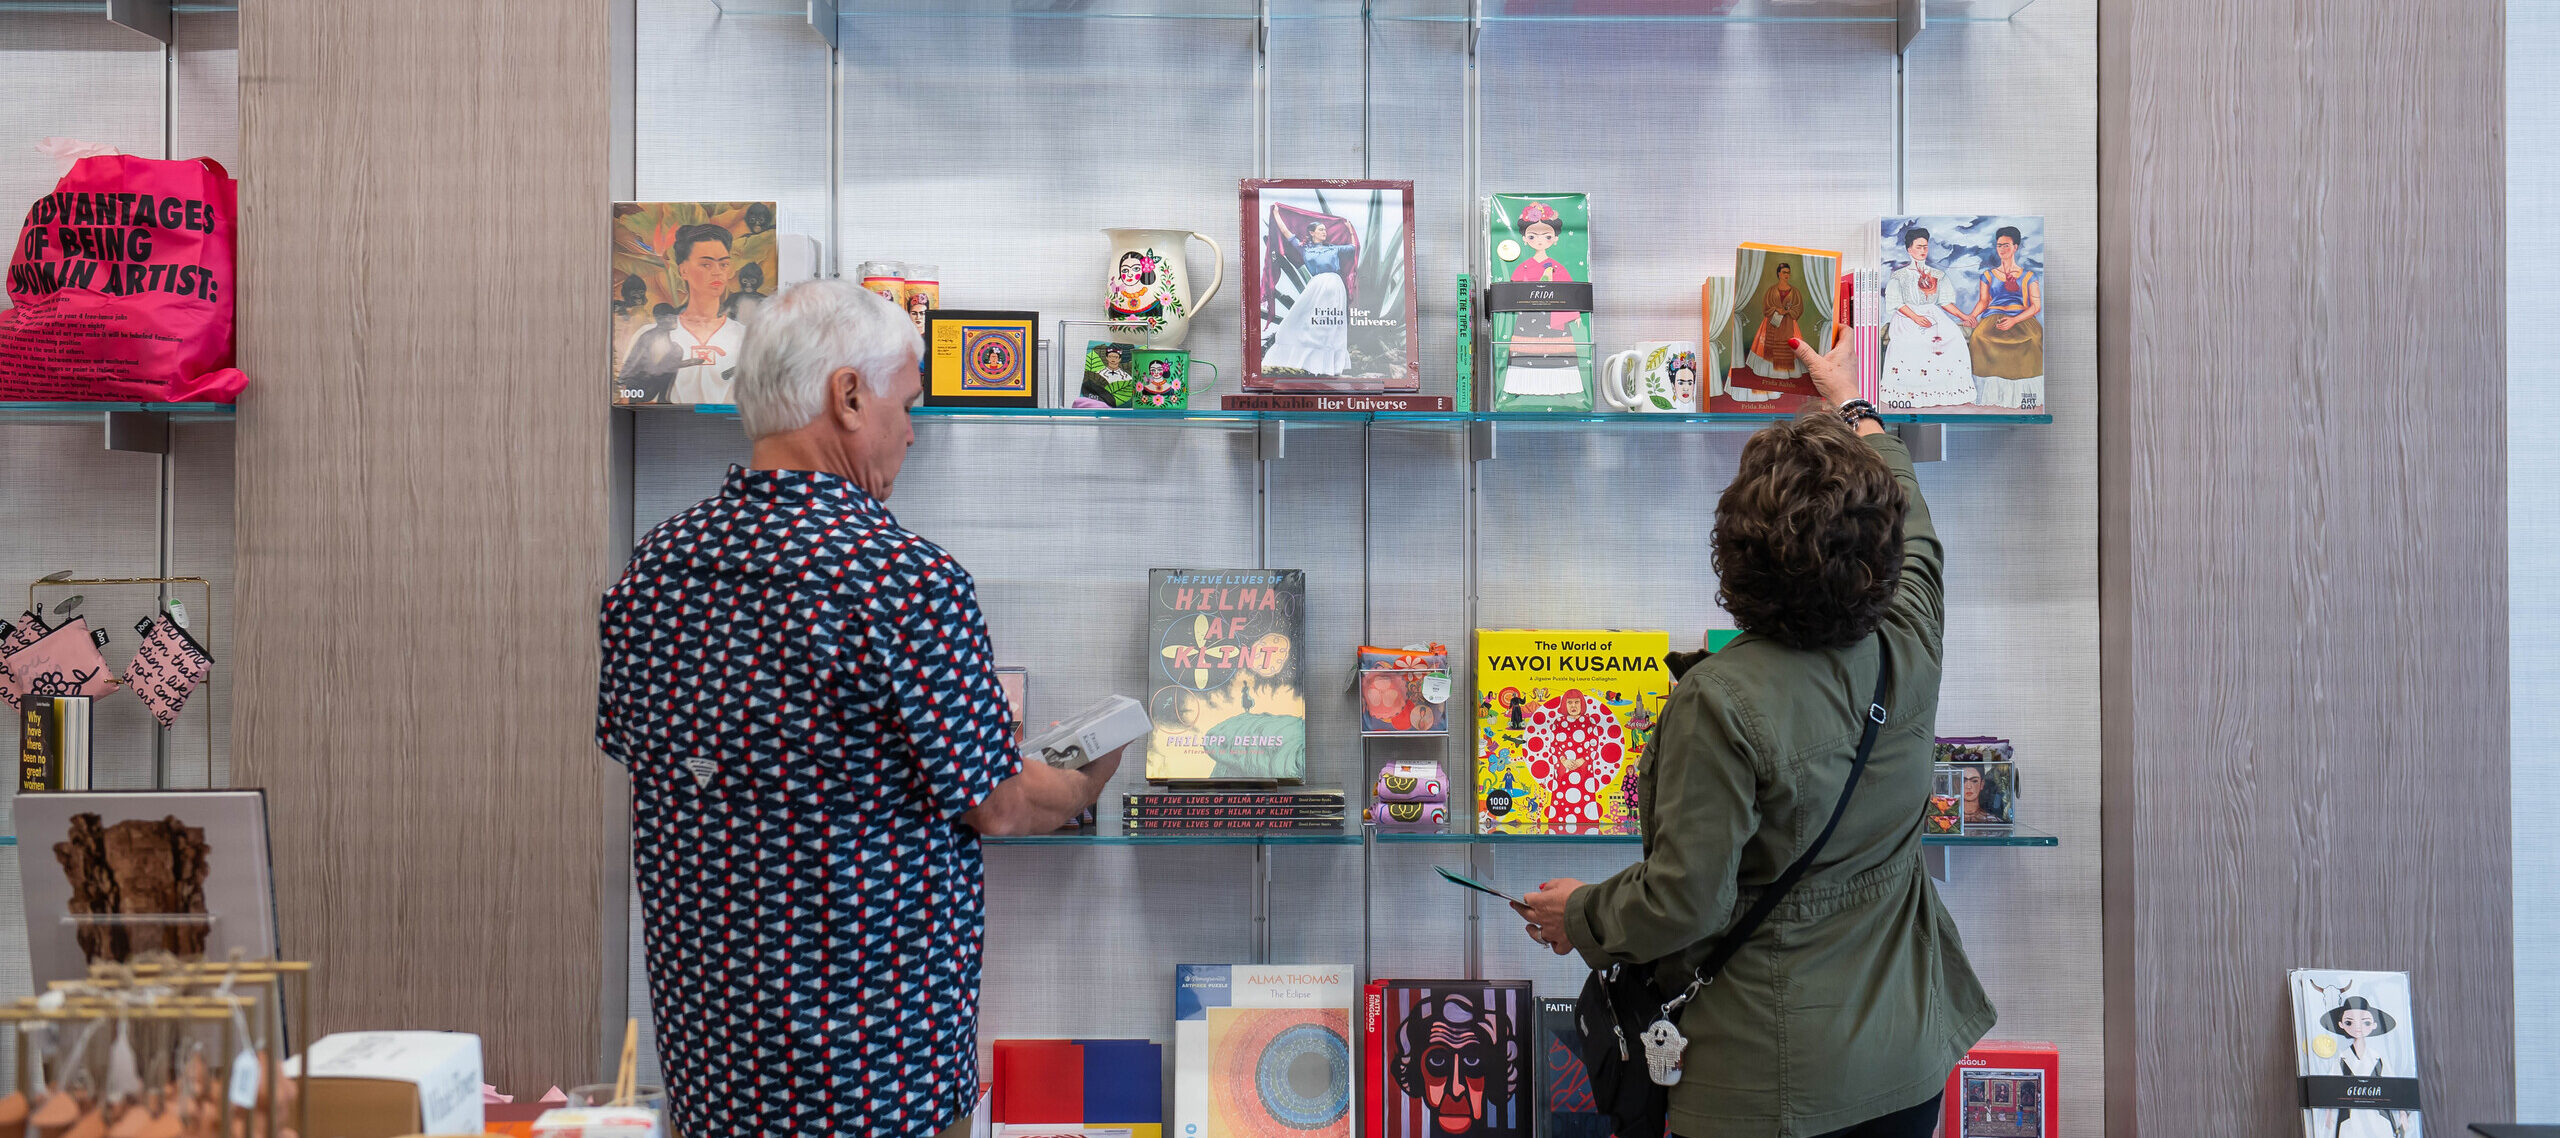 Two visitors are standing in a shop in front wall mounted shelves filled with art books and objects. They have light skin tones and are wearing a patterned shirt and an olive jacket. One of the visitors is reaching for a card depicting a woman in a colorful dress framed by white curtains.